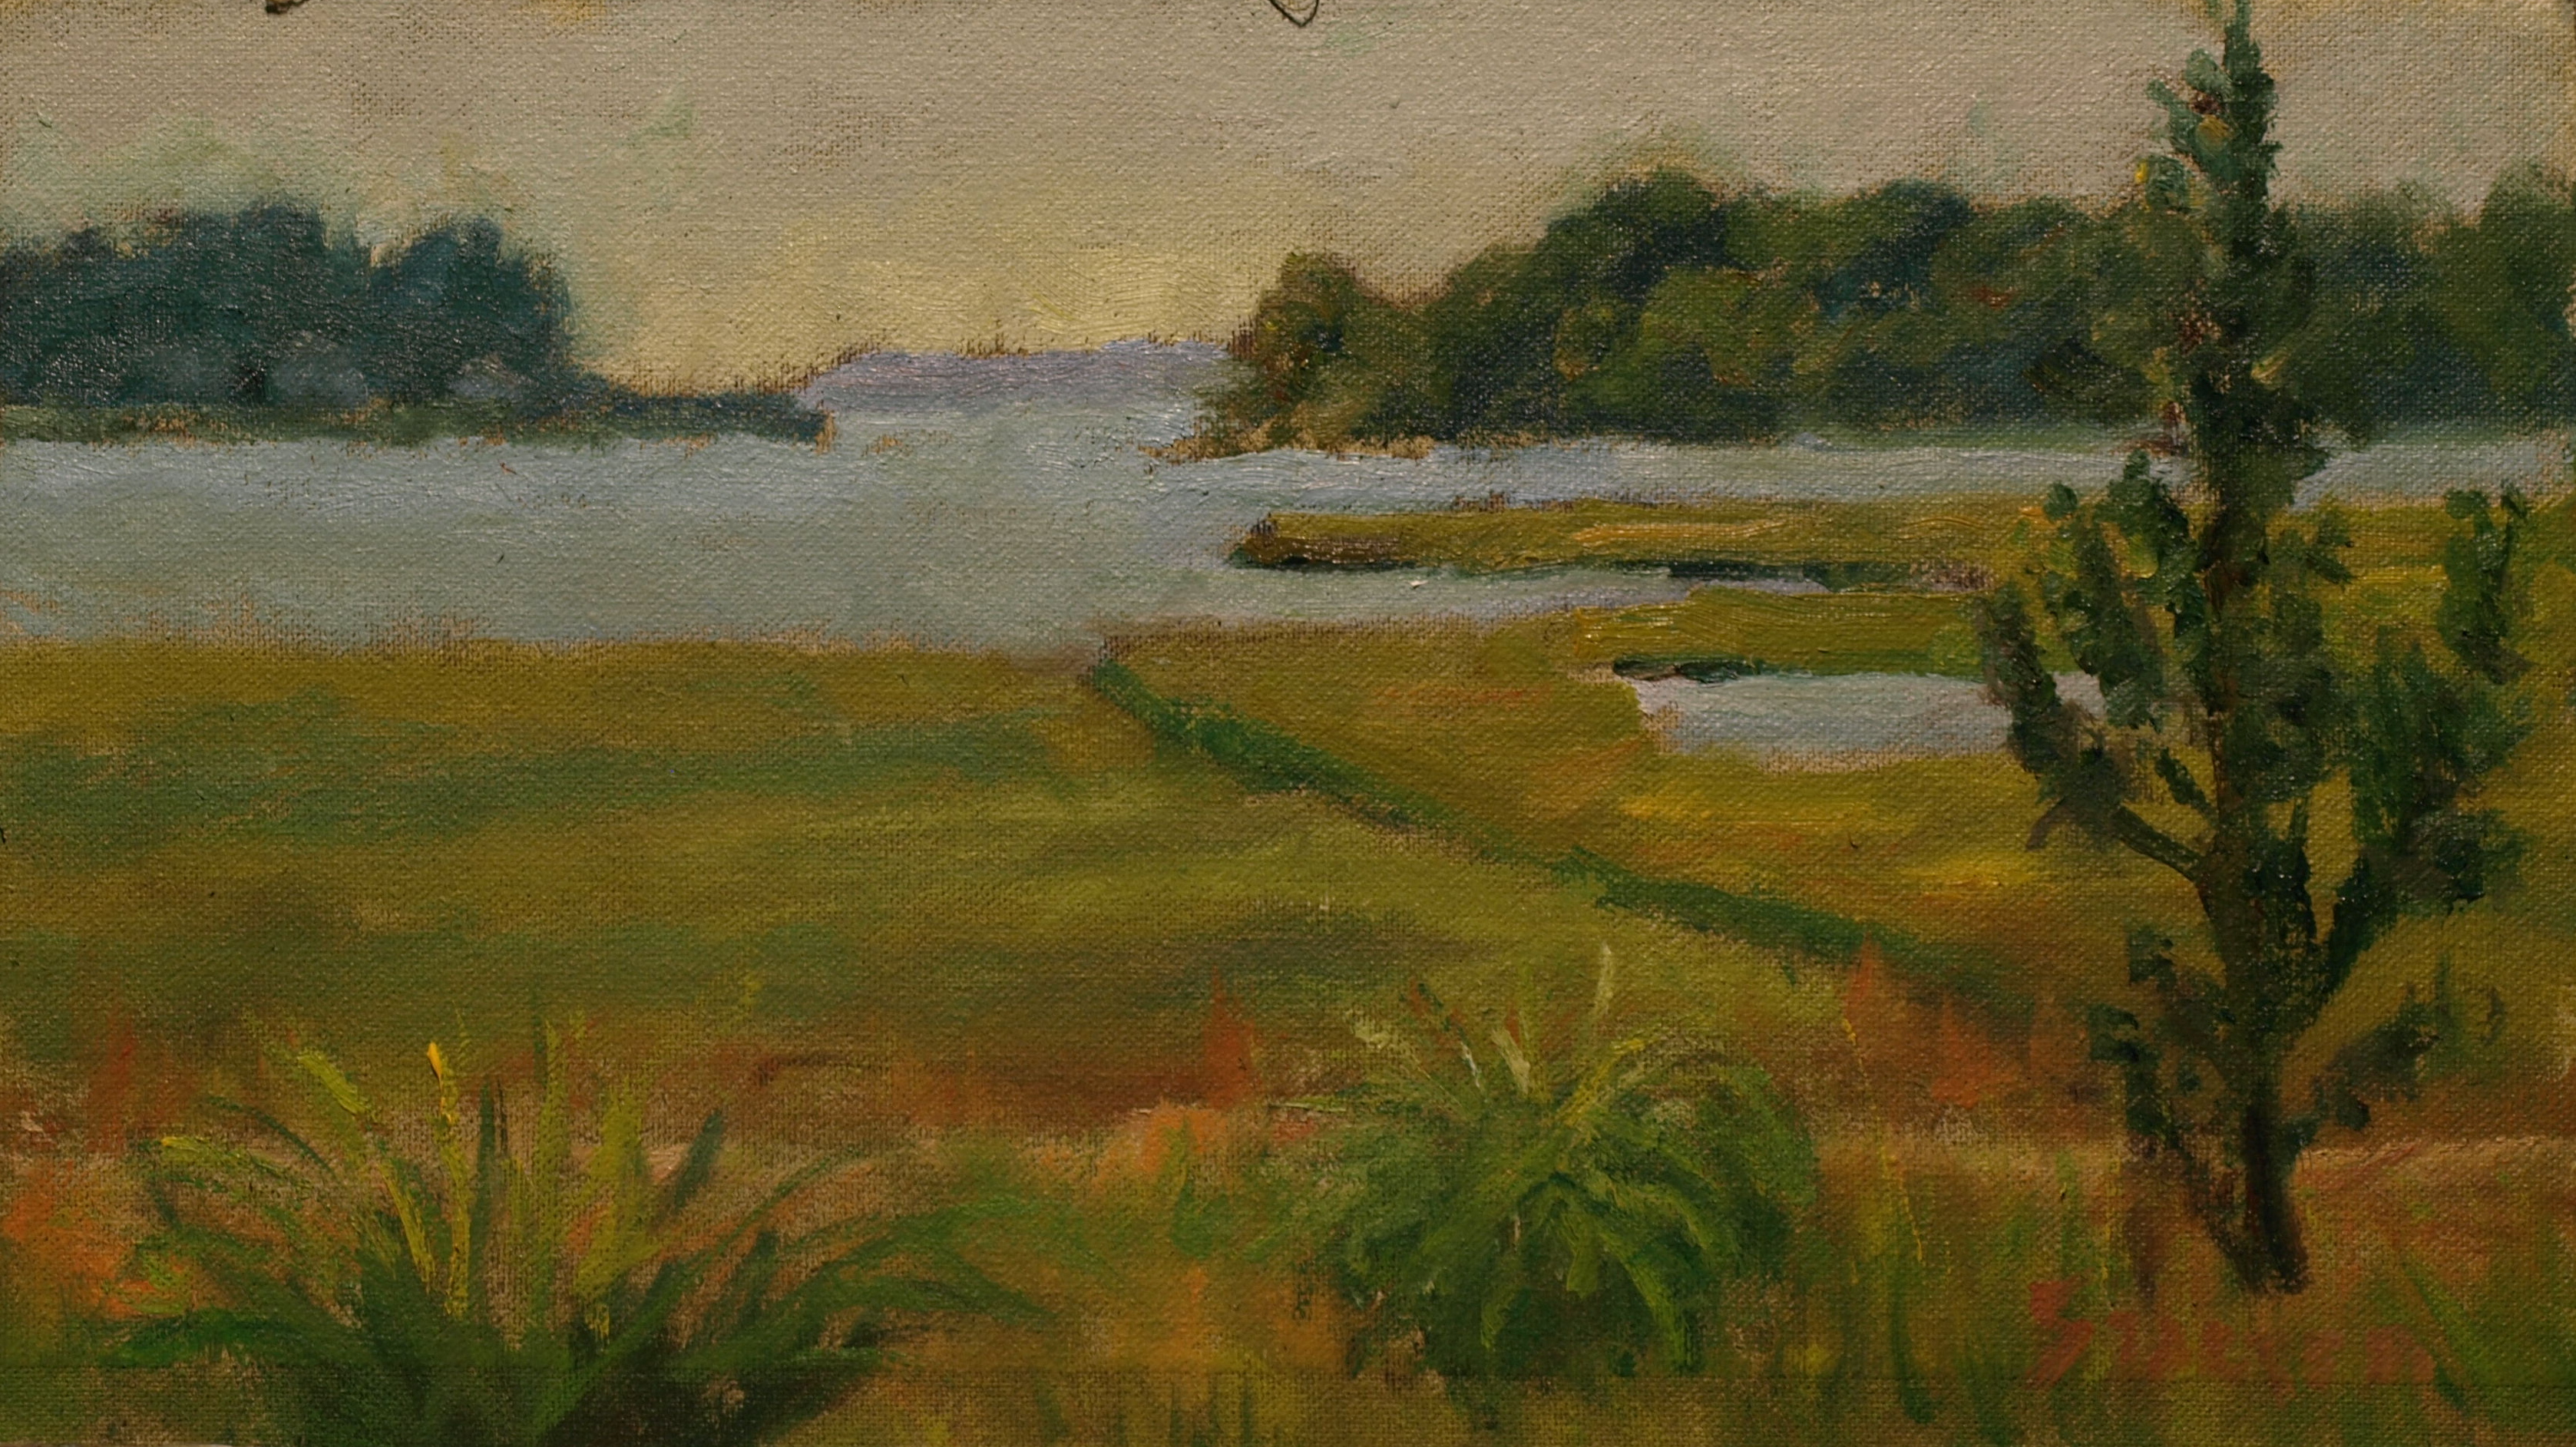 Across the Marshland, Oil on Canvas on Panel, 8 x 14 Inches, by Richard Stalter, $220